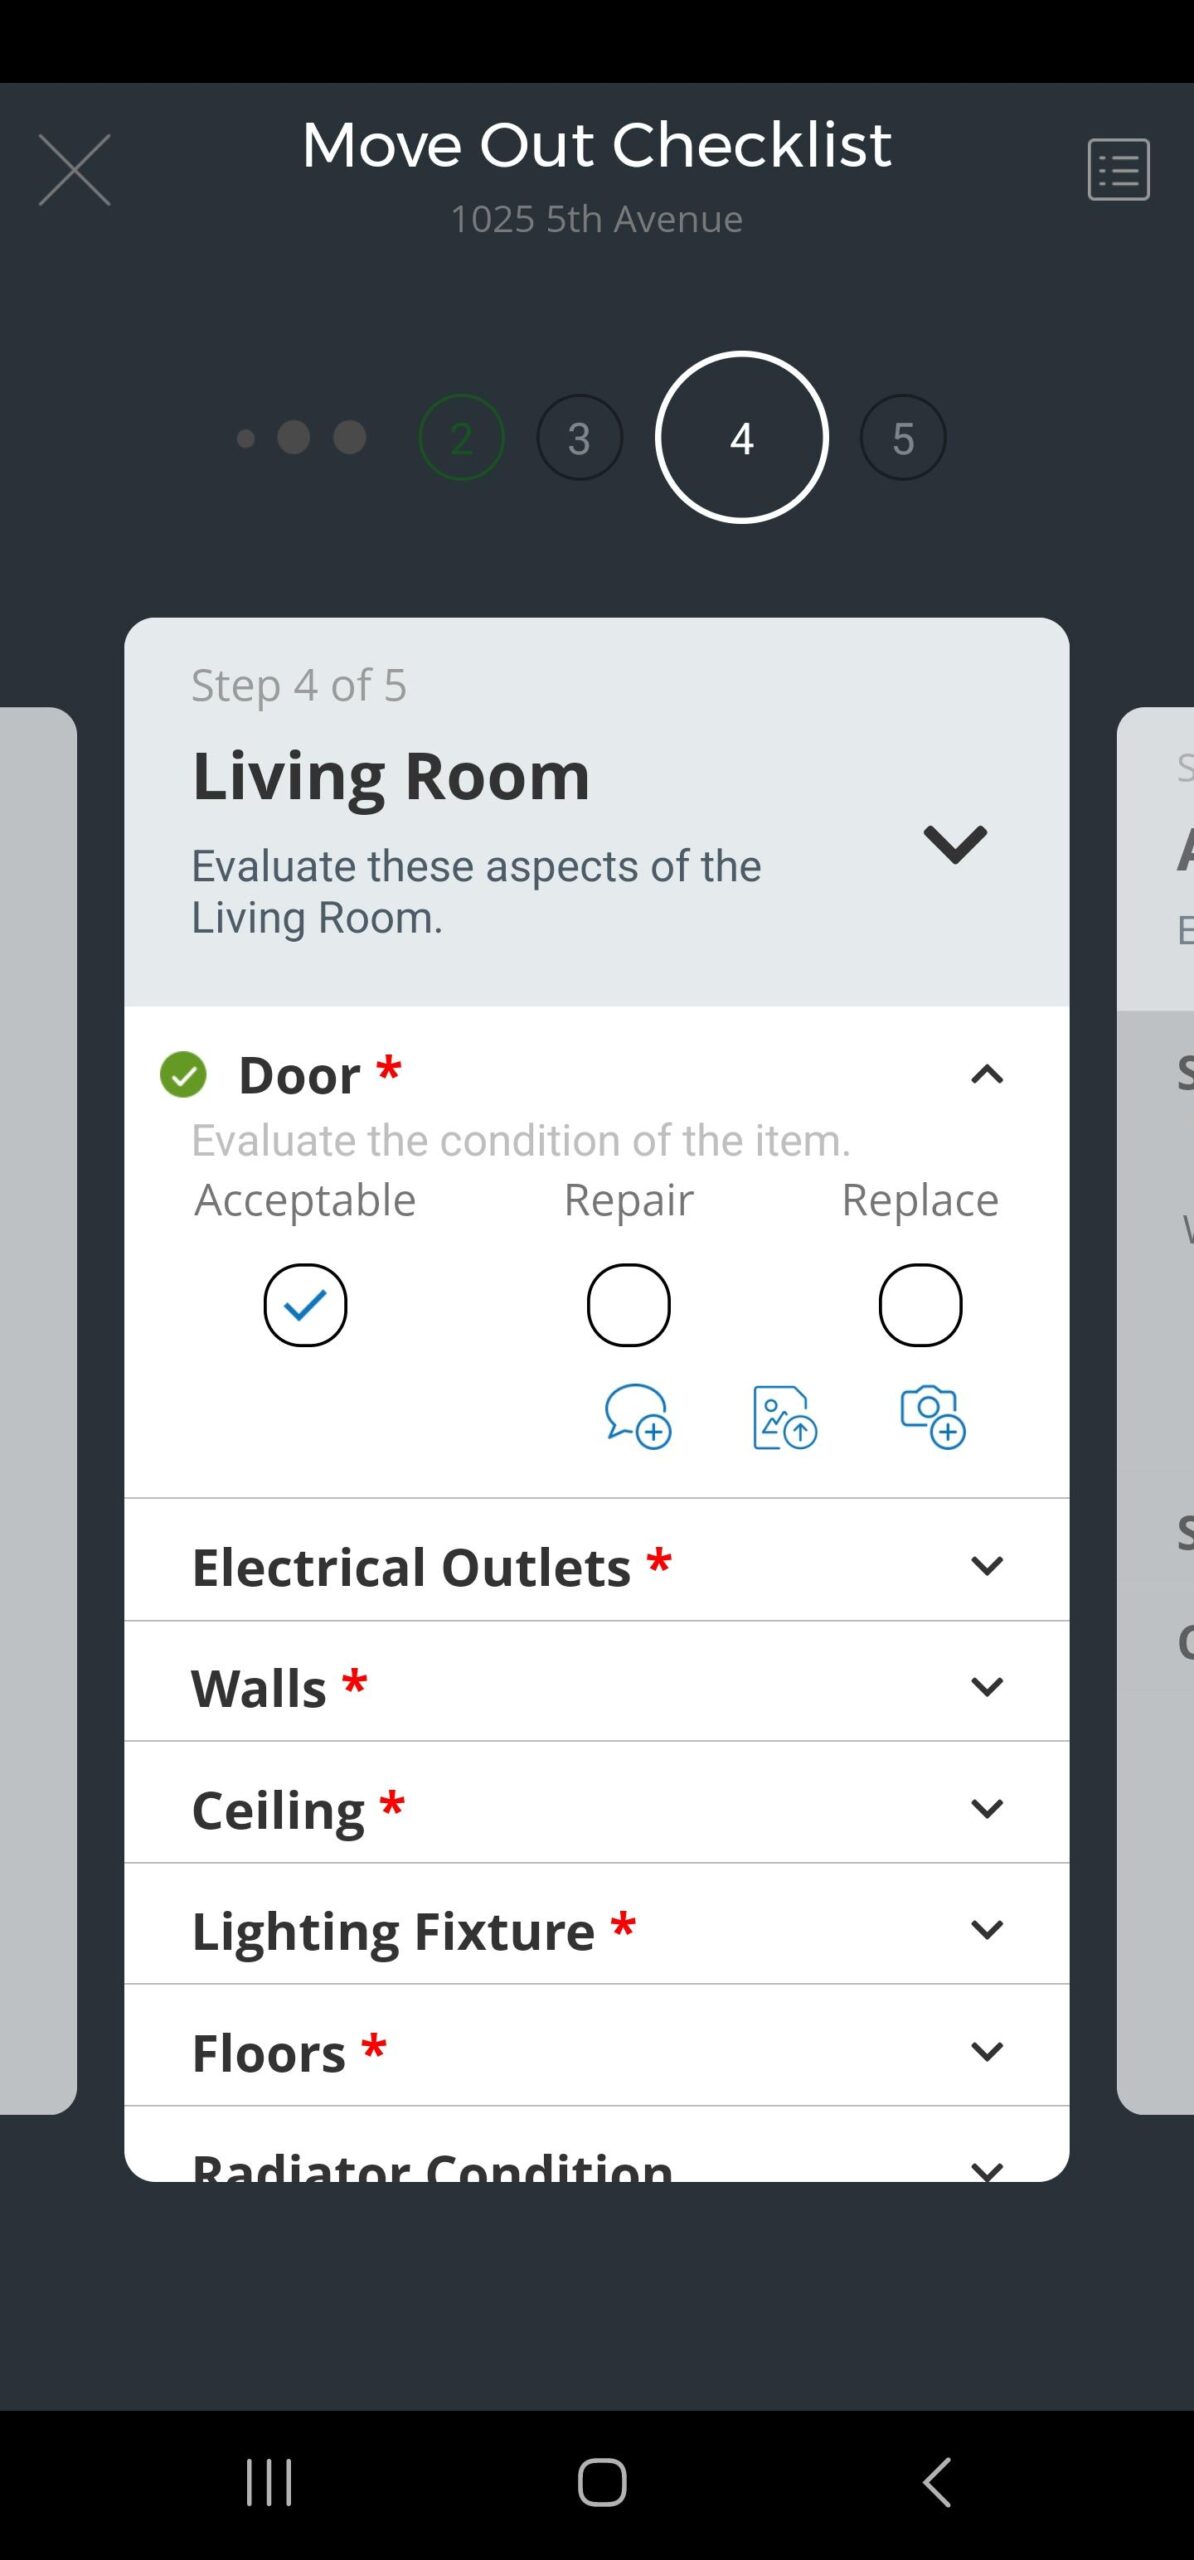 An InCheck application screen with a Field Group card example for a Living Room, showing options like Doors, Electrical Outlets, and more in an accordion format. Each option also has radio buttons for users to select a condition like Acceptable, Repair, or Replace. There are also icons for users to add notes or upload photos to each option. 